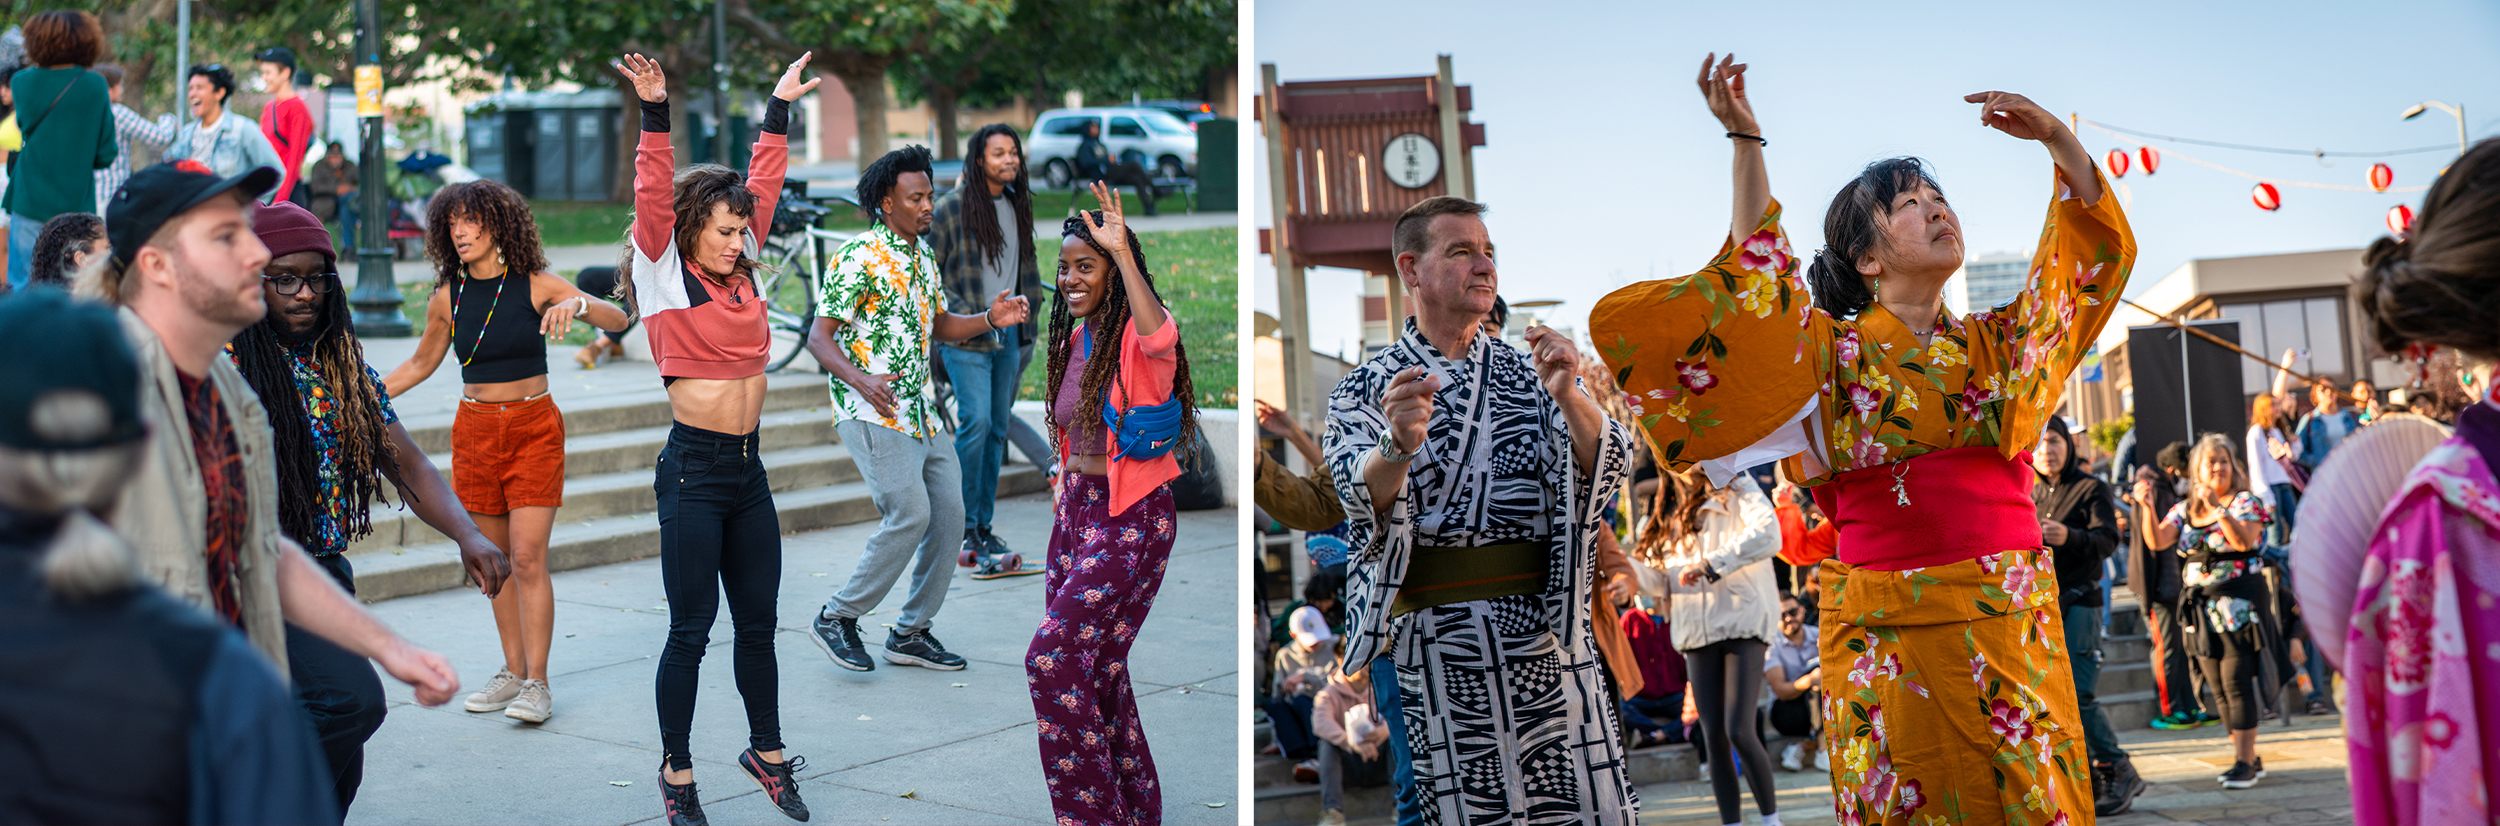 Two photos: On the left, a group of people strikes expressive poses as they dance outdoors. On the right, a group of people wearing ornate clothing dances outdoors.